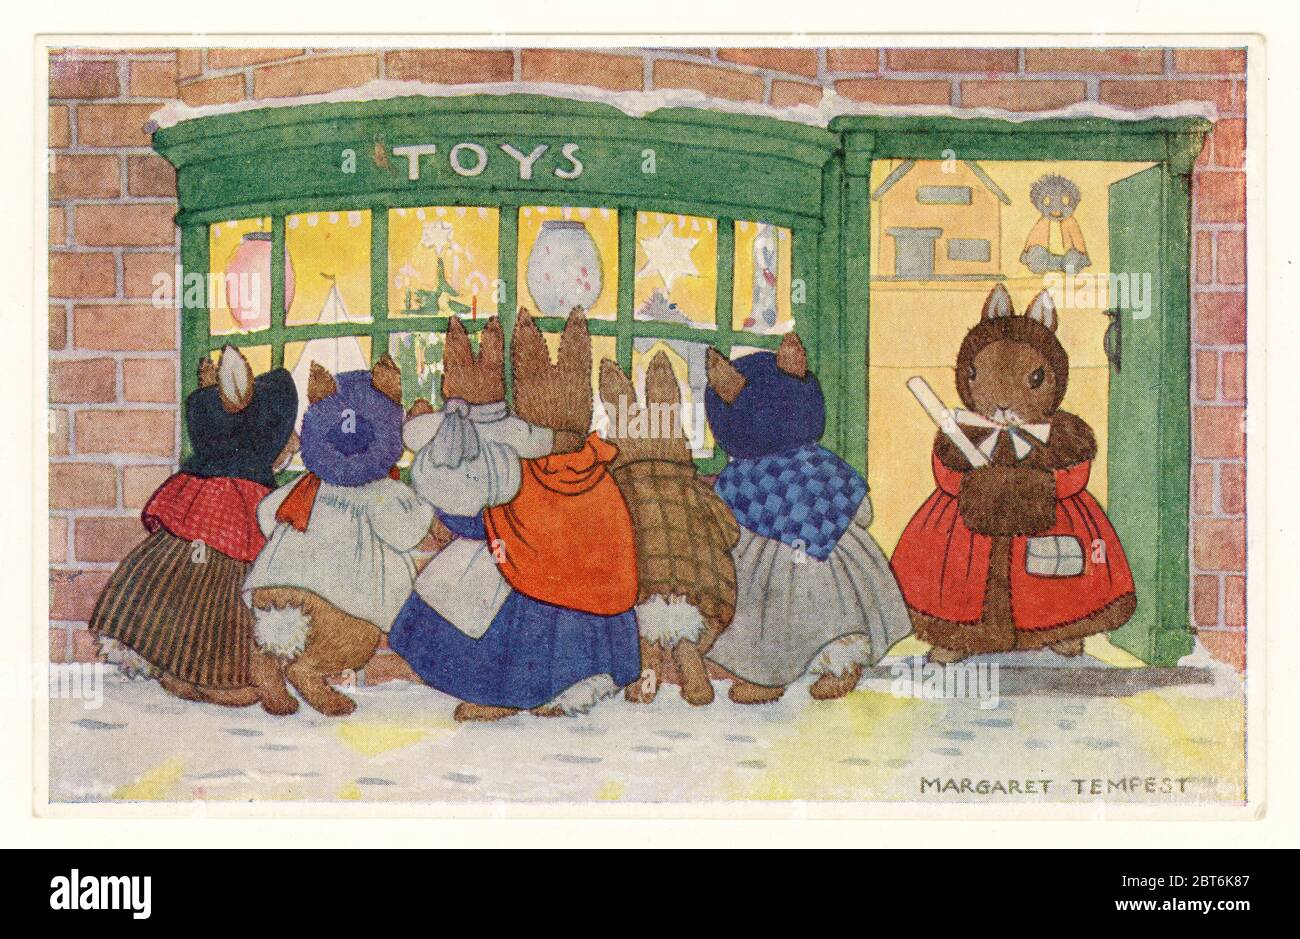 Original greetings postcard illustration of rabbits in clothes looking in at the toy shop window, "The Toy Shop", U.K., circa 1940's Stock Photo